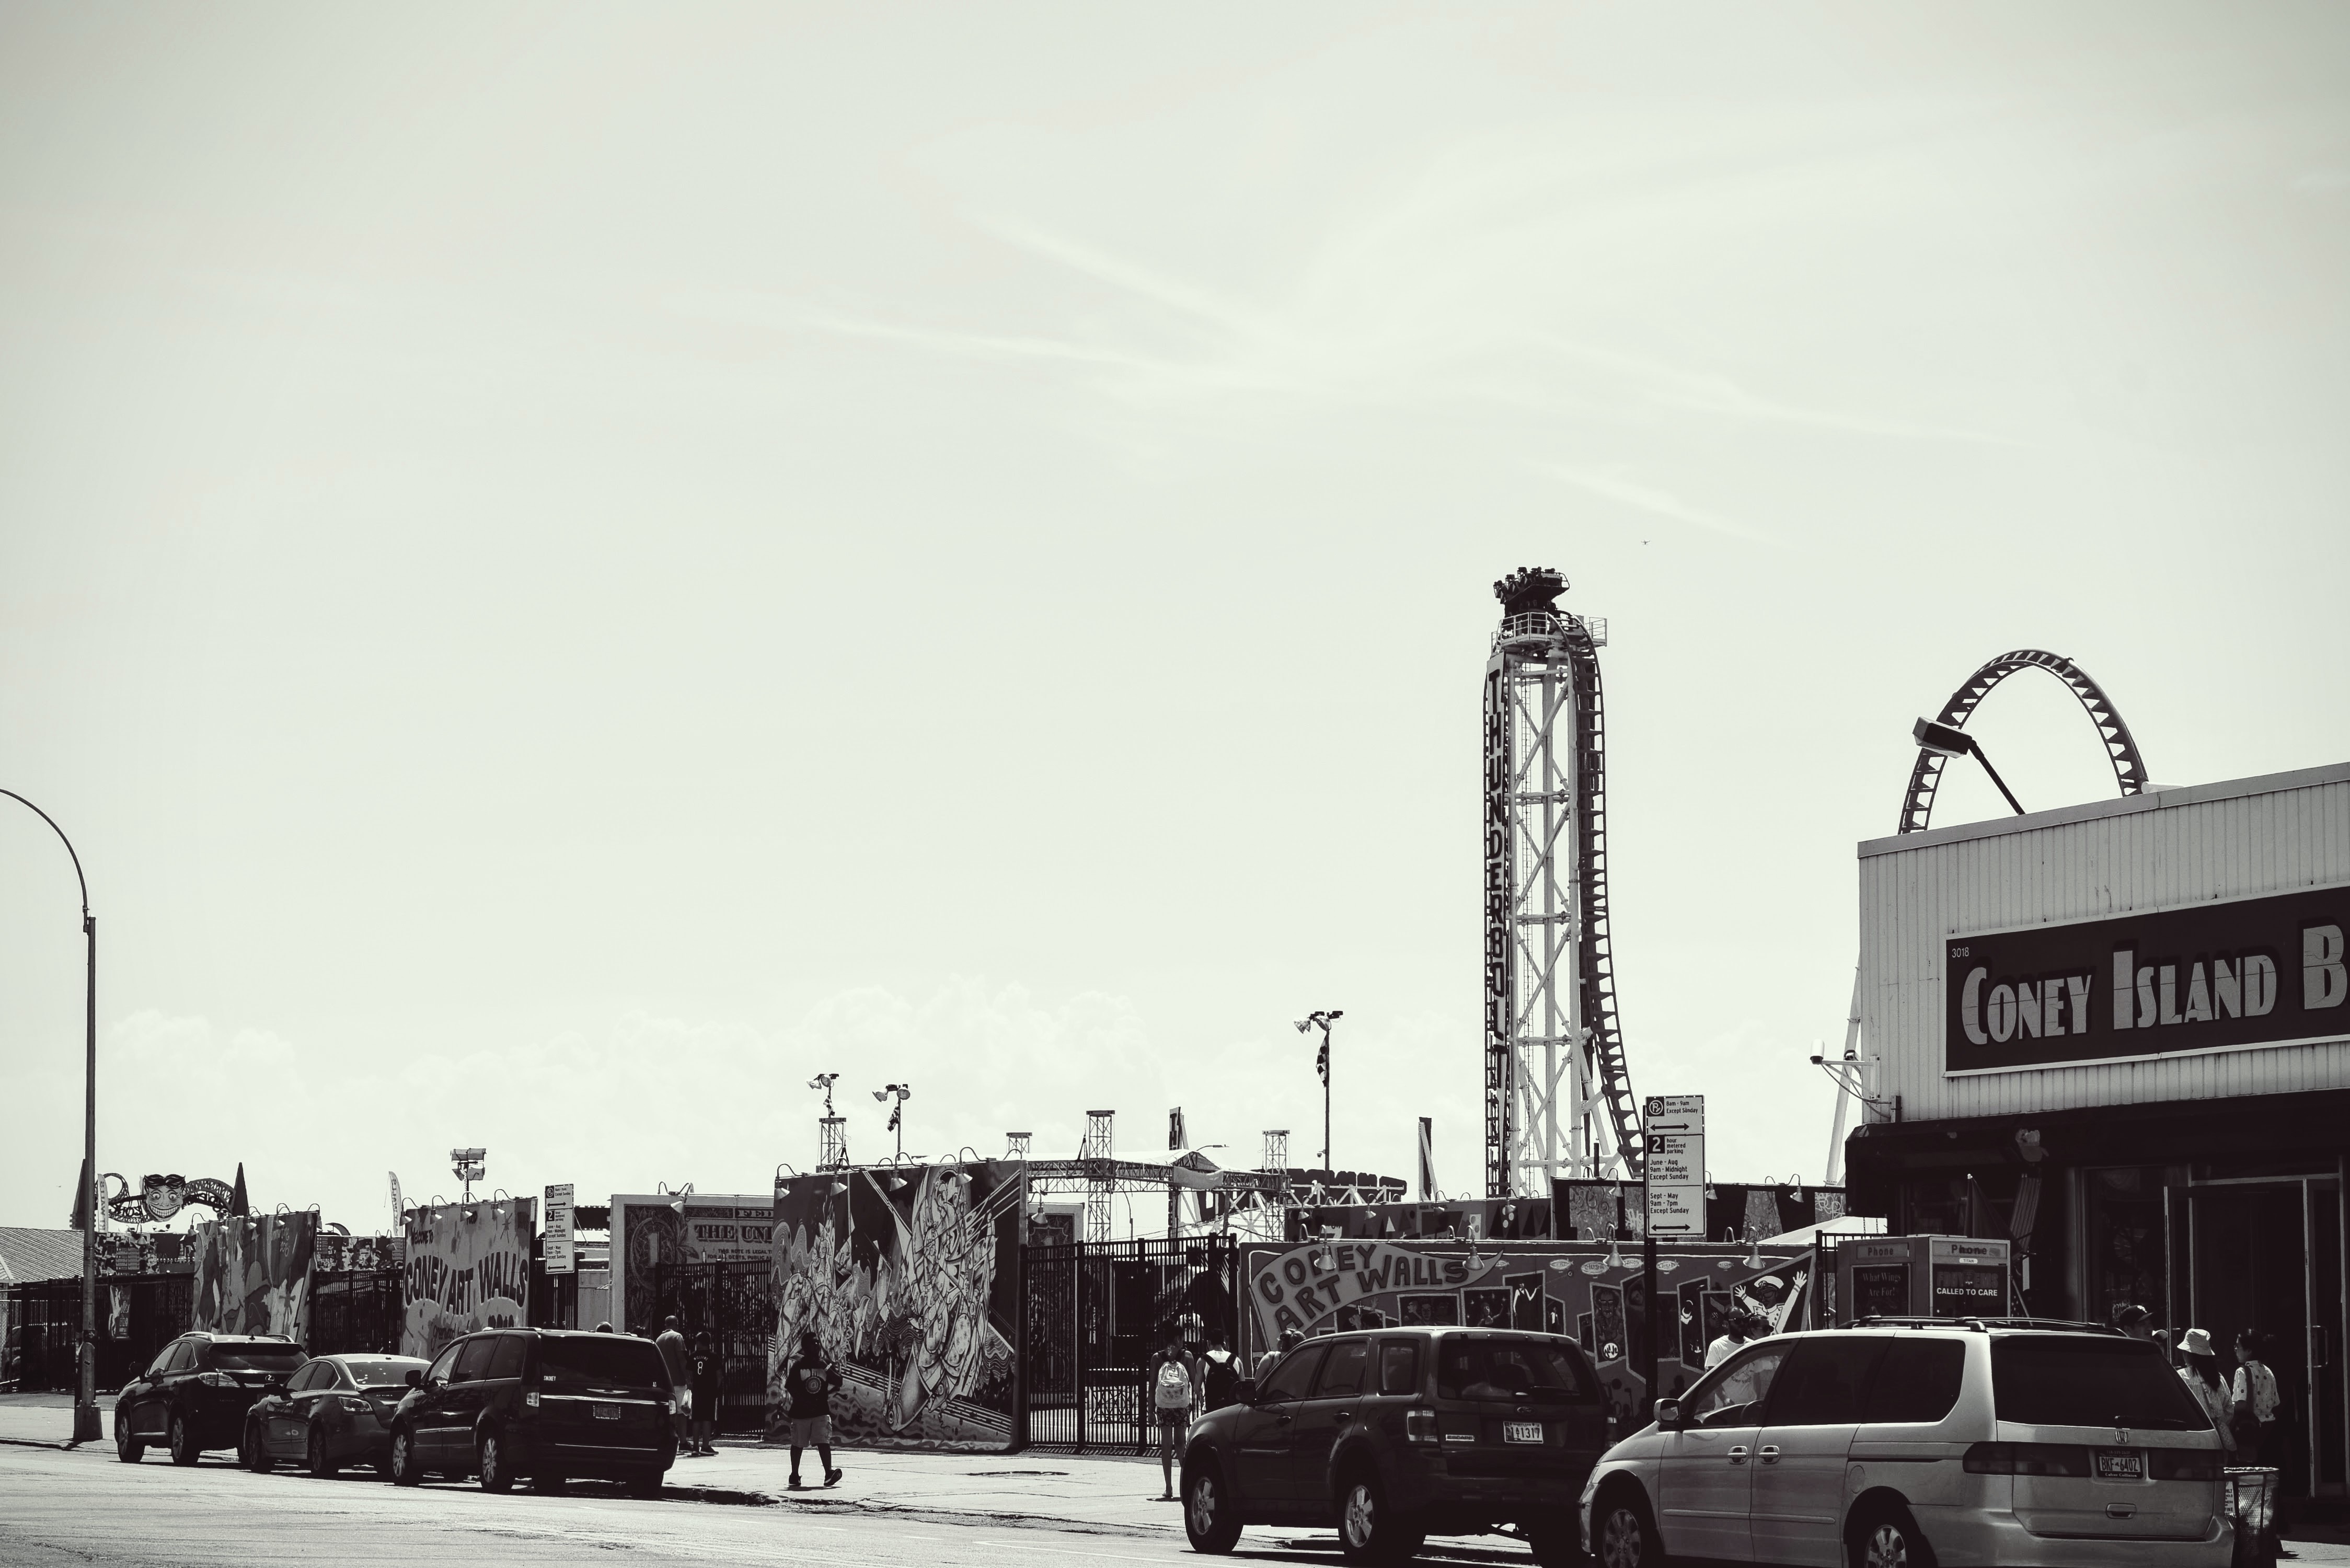 vintage grayscale photo of cars parked beside coney island building